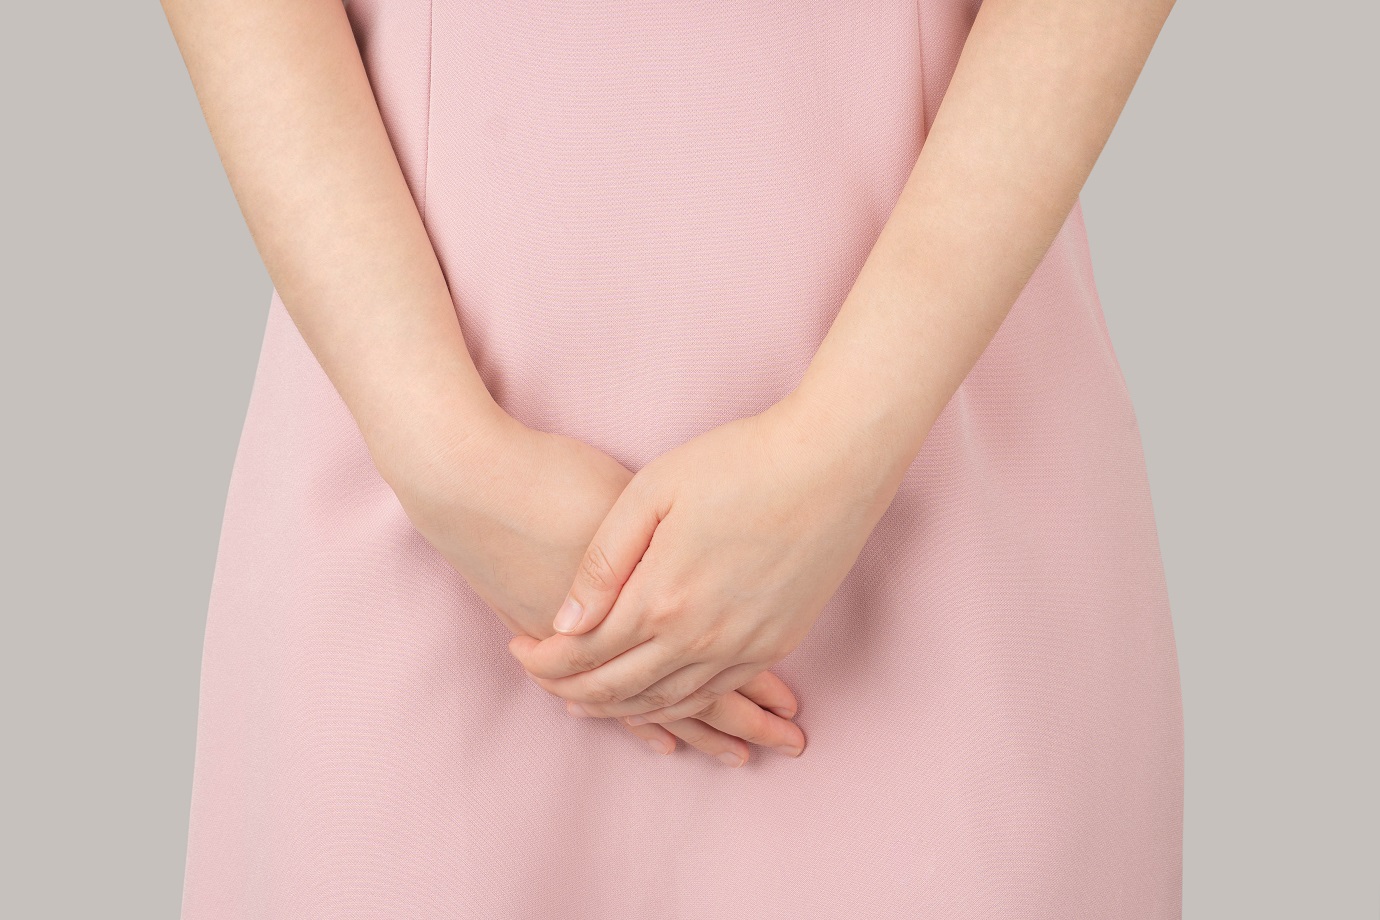 Woman hands holding her crotch suffering from pelvic pain or itc